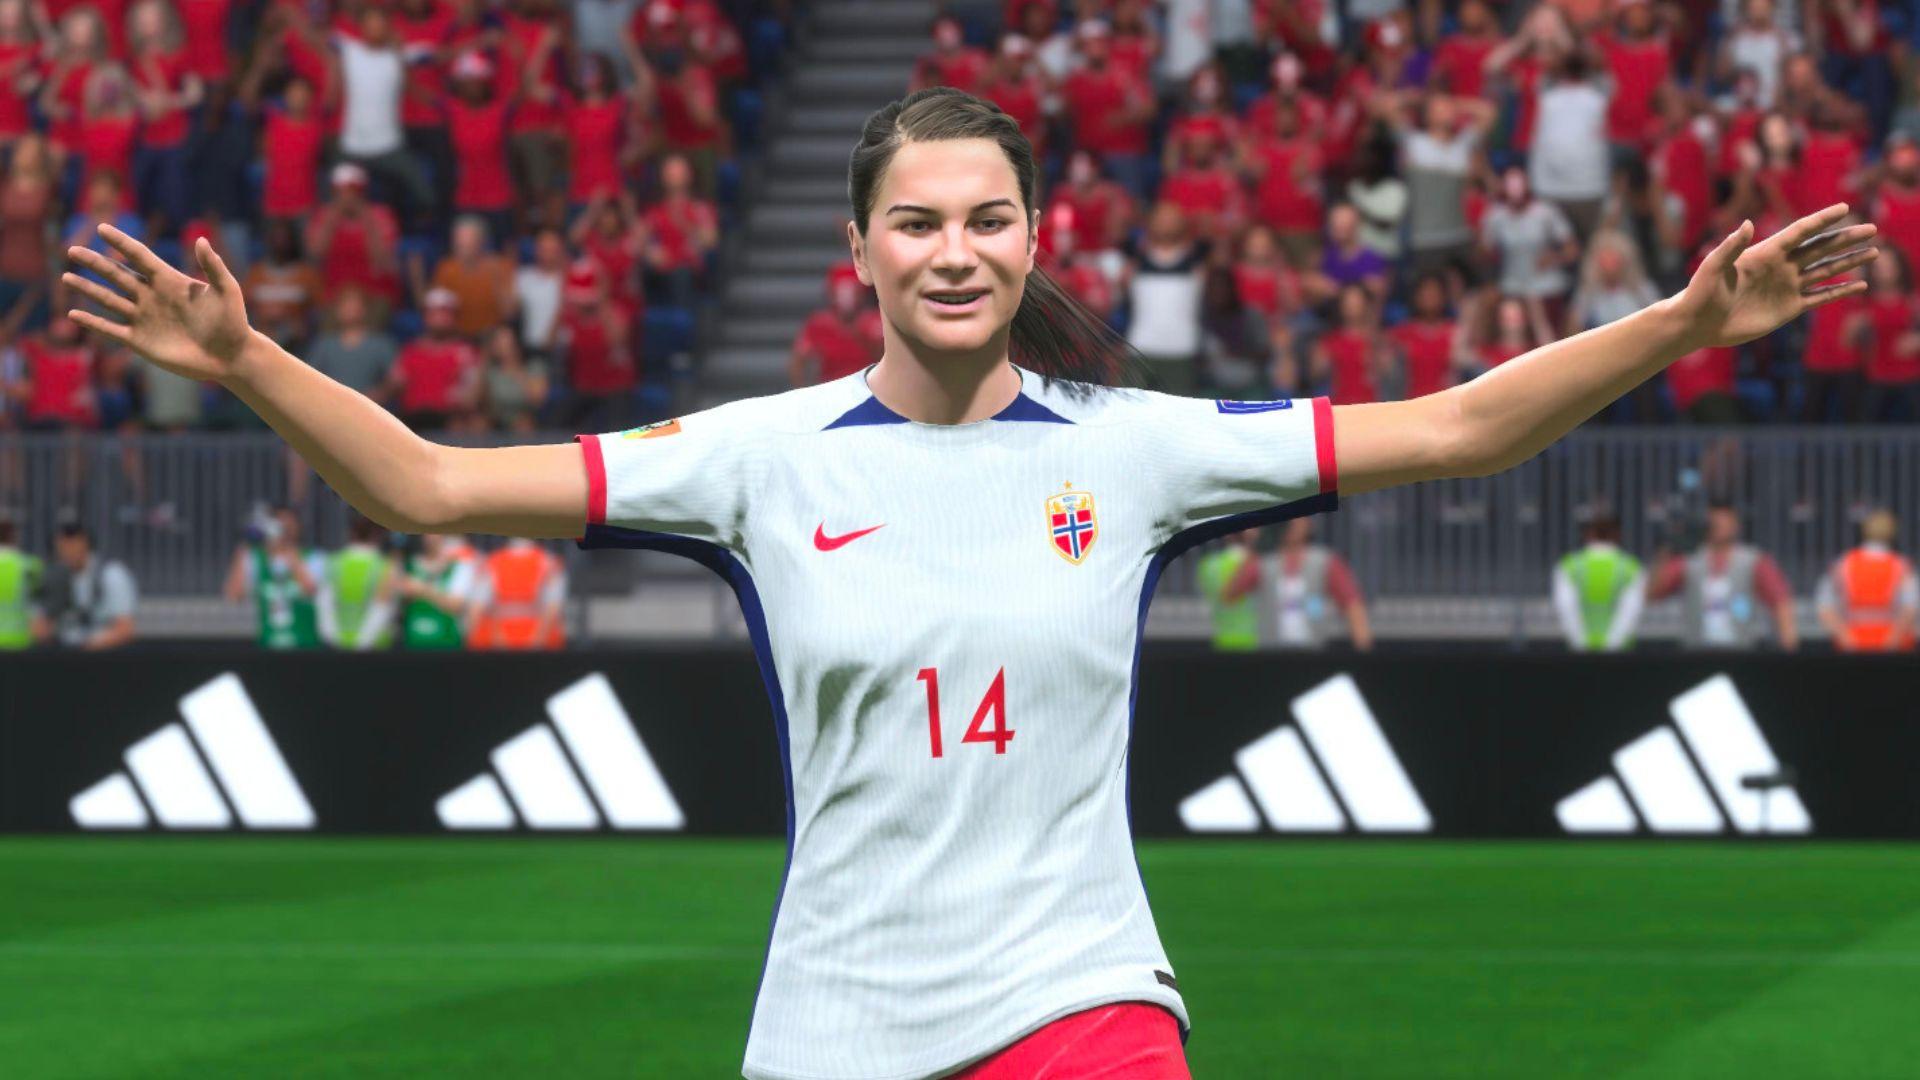 Ada Hegerberg in EA SPORTS FC 24 celebrating with arms aloft in white Norway jersey